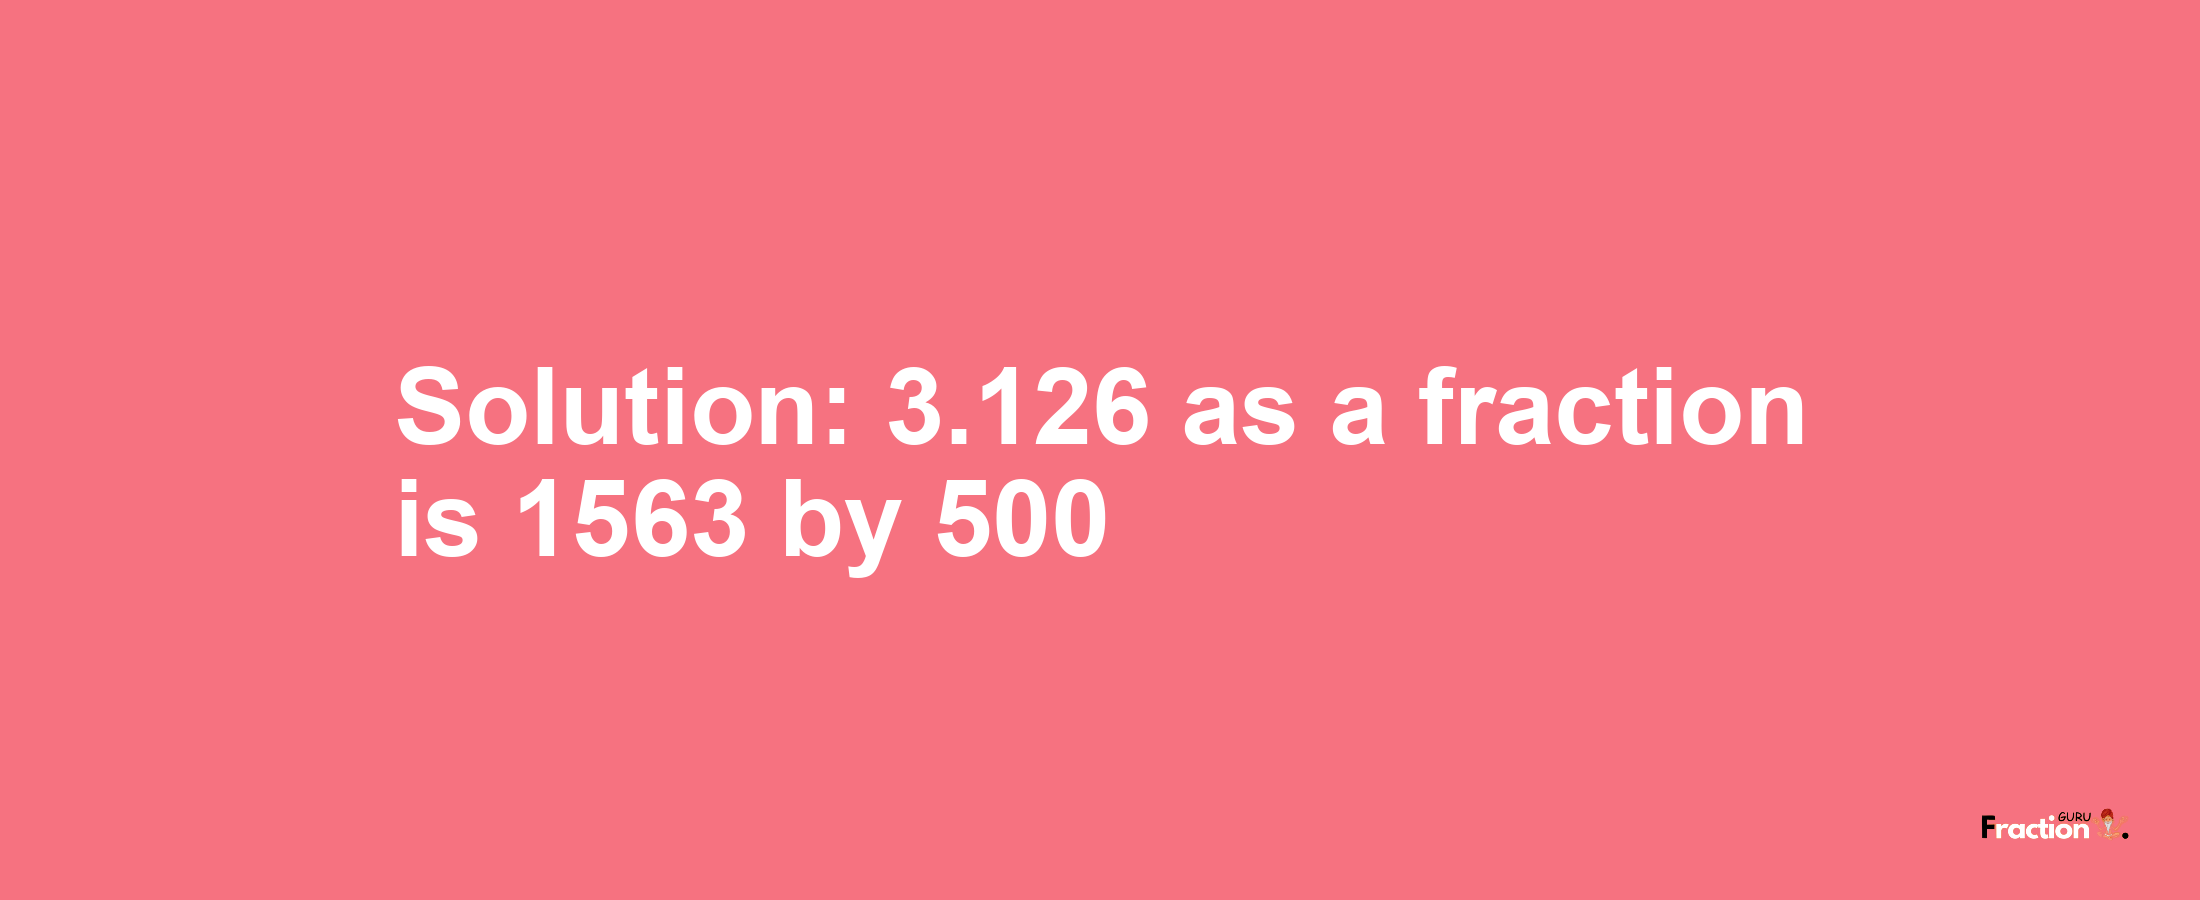 Solution:3.126 as a fraction is 1563/500